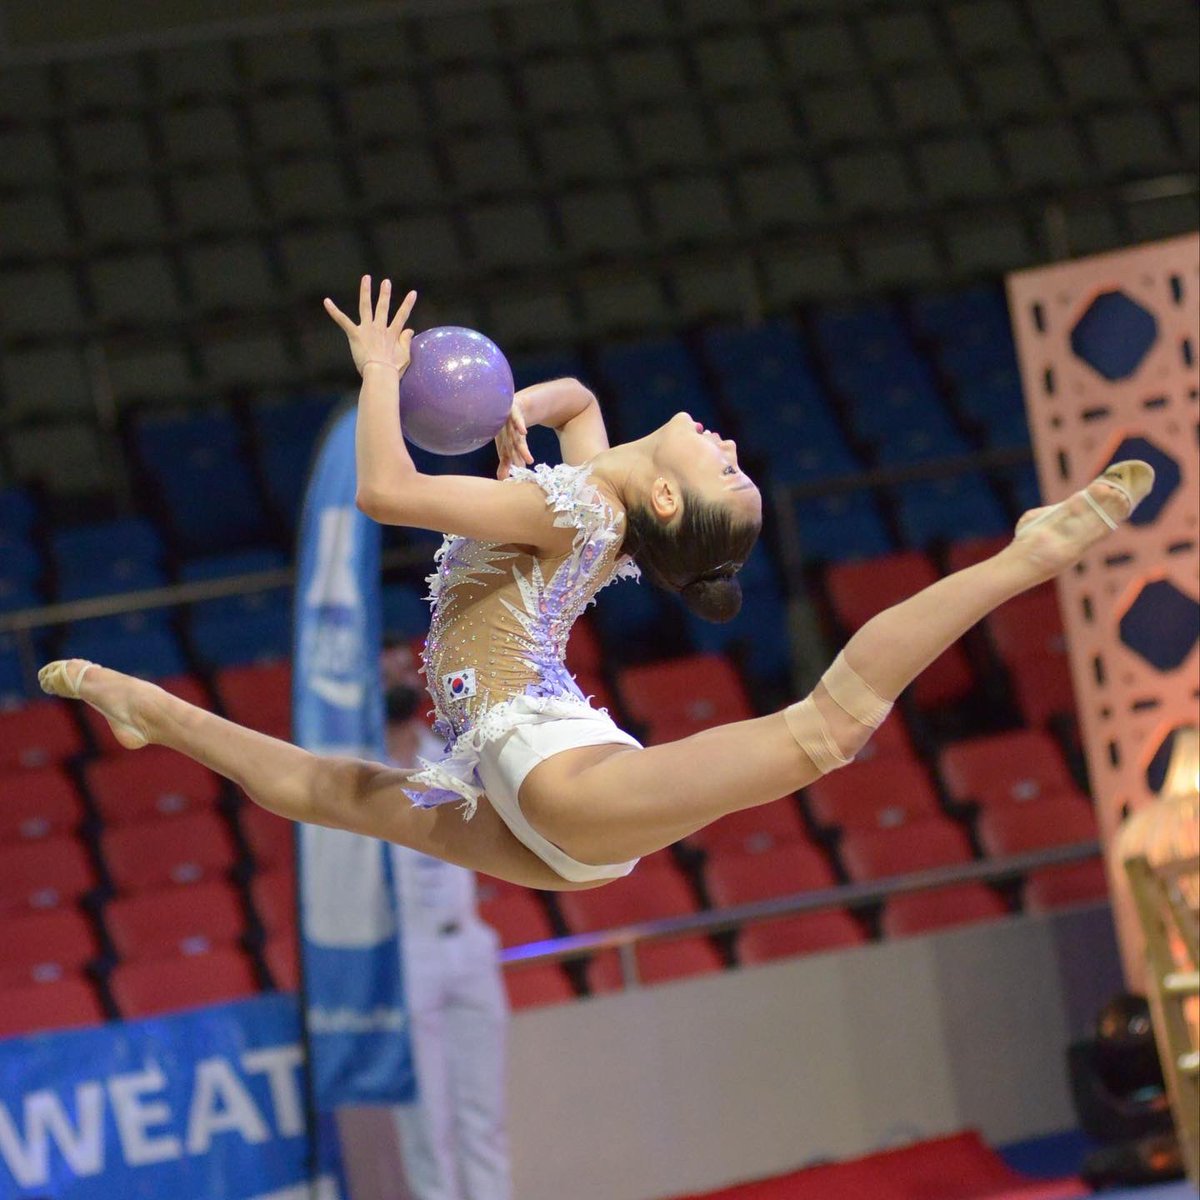 From ribbon twirling to hoop acrobatics, Rhythmic Gymnastics Asian Championships 2023 🇵🇭🇵🇭are a true feast for the eyes! 👀🤩

#gymnastics #asian #rythmicgymnastics #phillipines